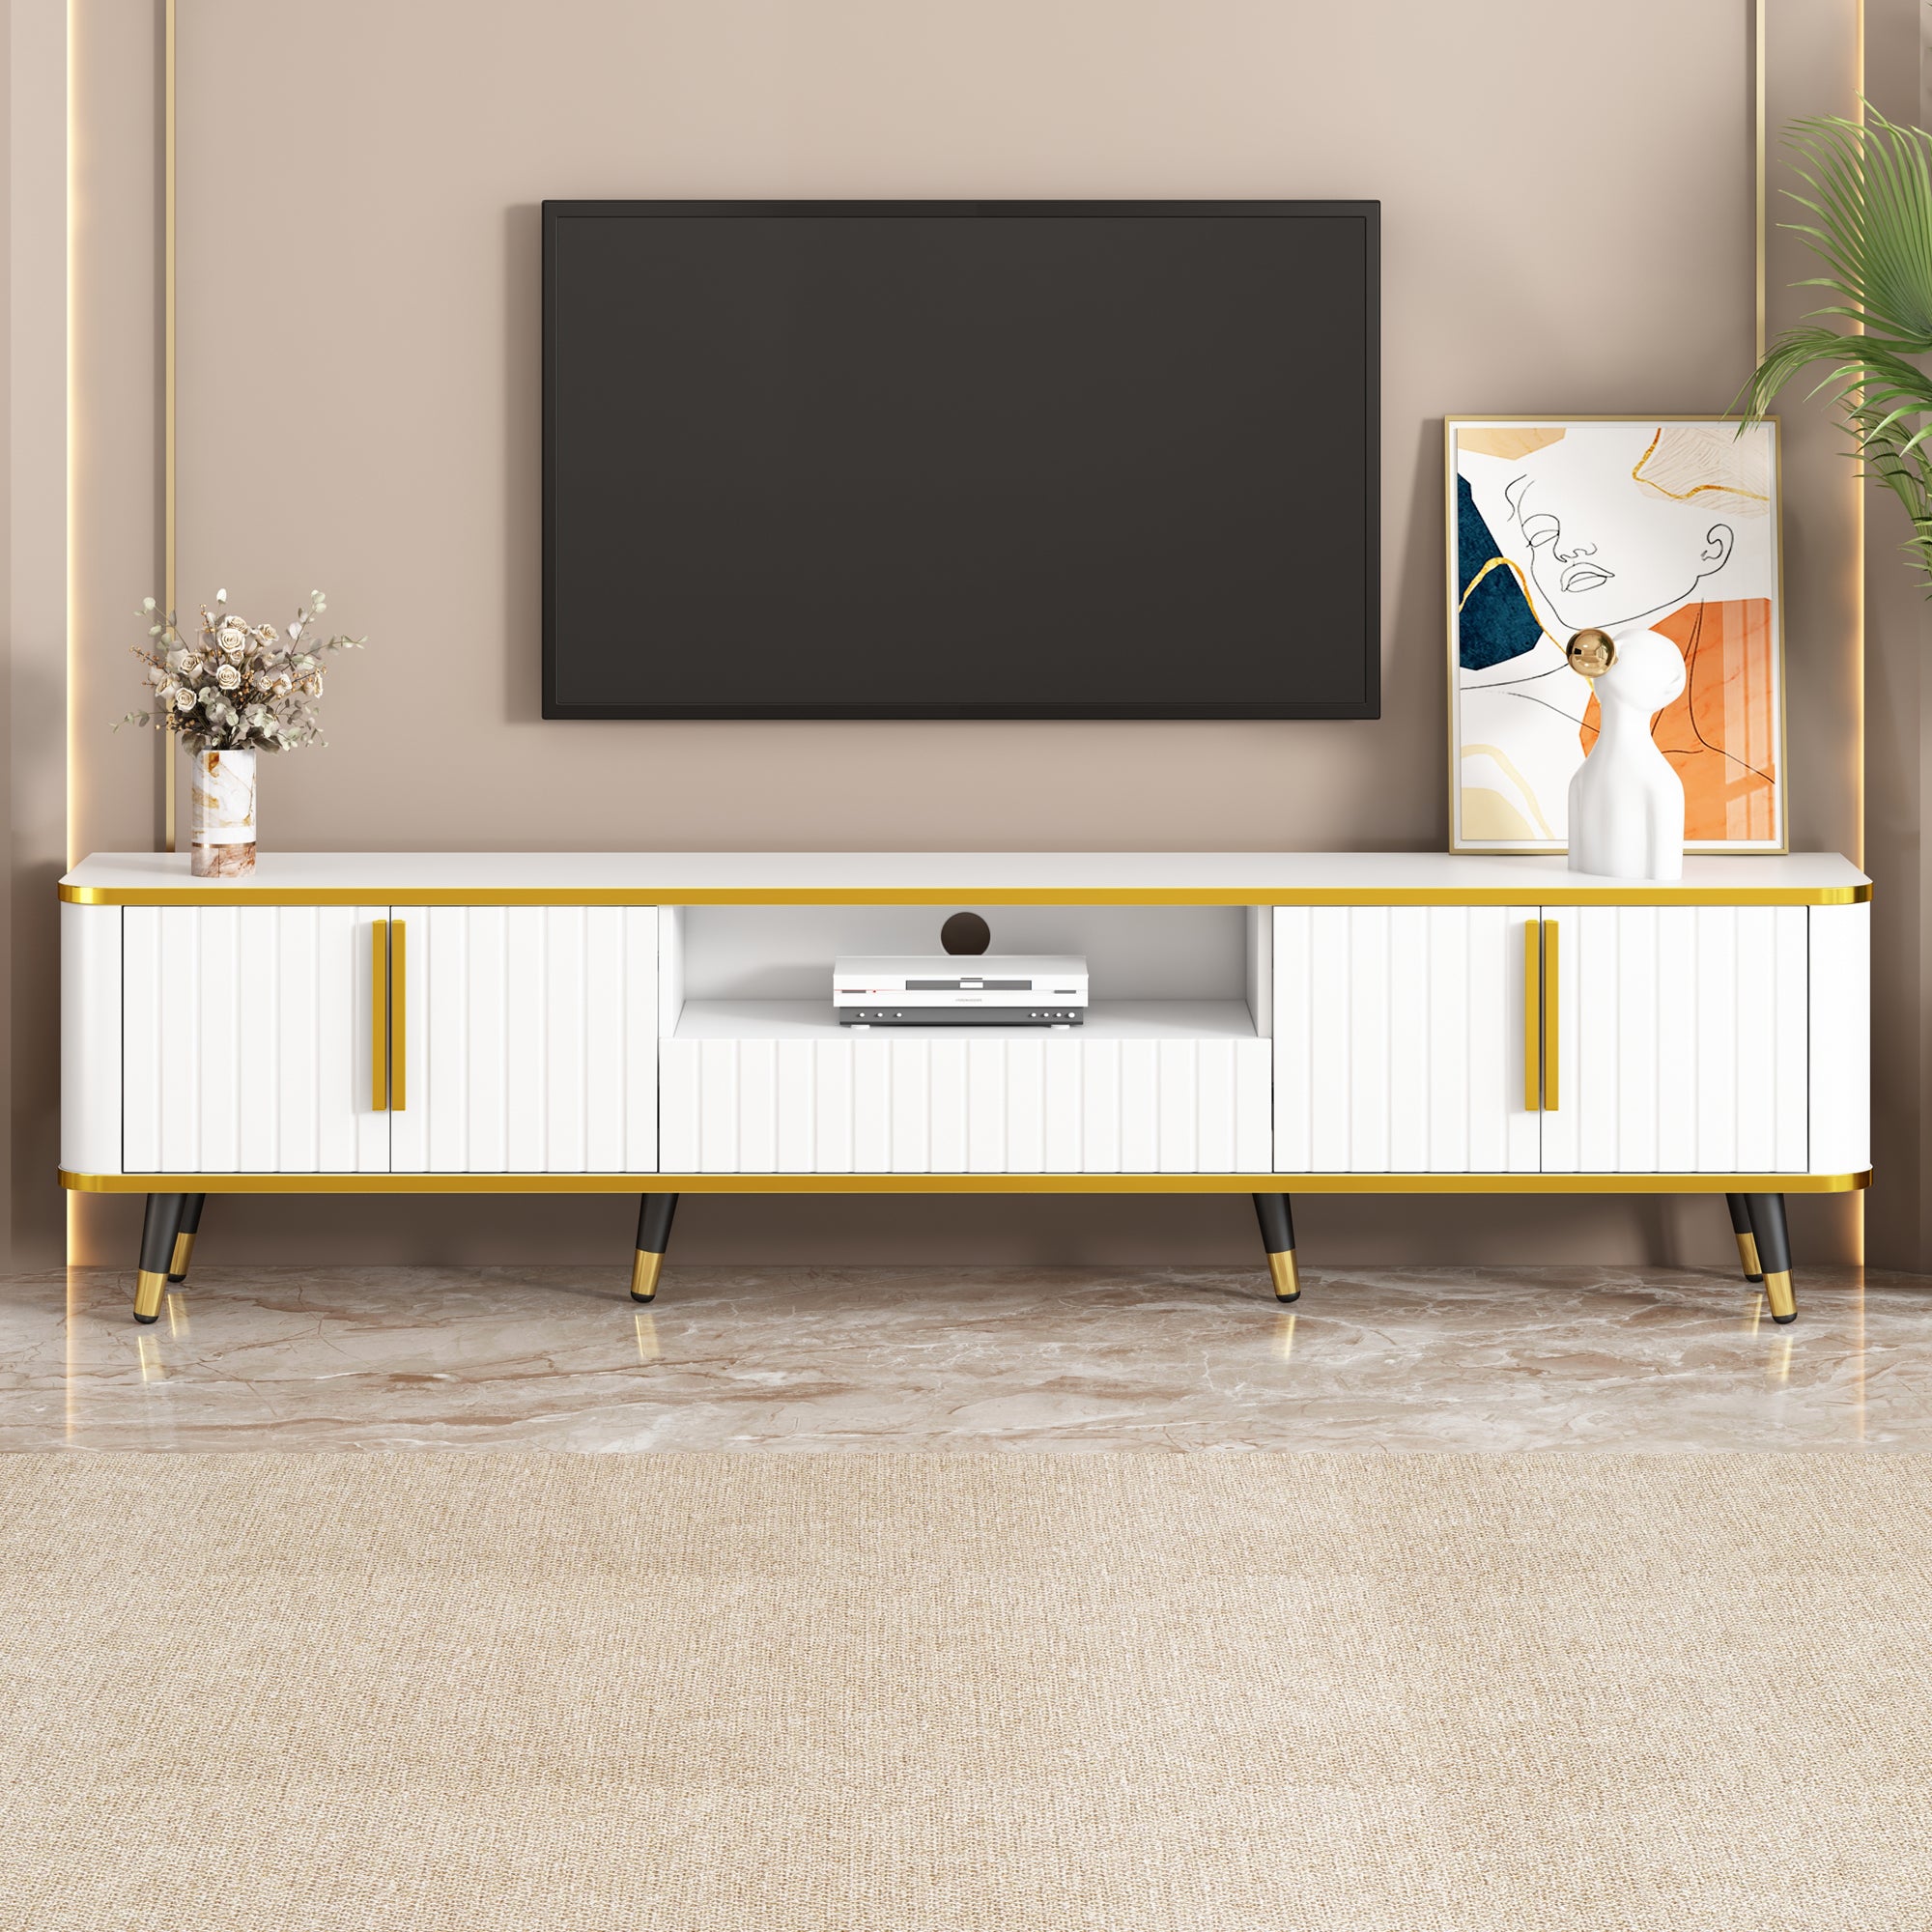 ON TREND Luxury Minimalism TV Stand with Open Storage white+gold-primary living space-80-89